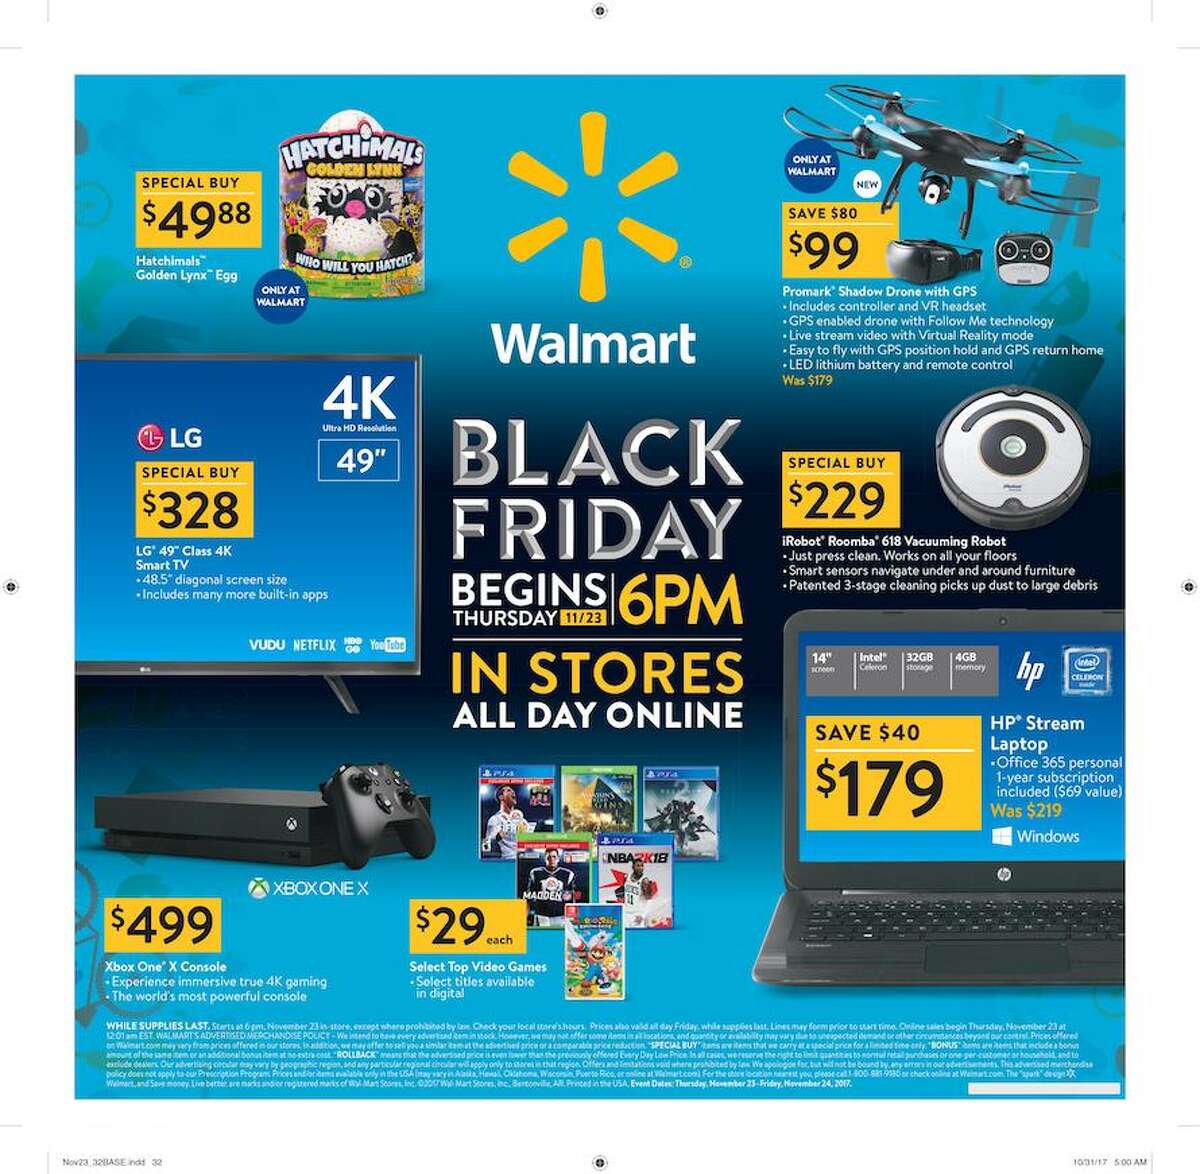 Walmart In-store hours: Thursday, Nov. 23 at 6 p.m.Online hours: Nov. 23 at 12:01 a.m. all deals are on Walmart.com. More details here.See their Black Friday ad circular here.